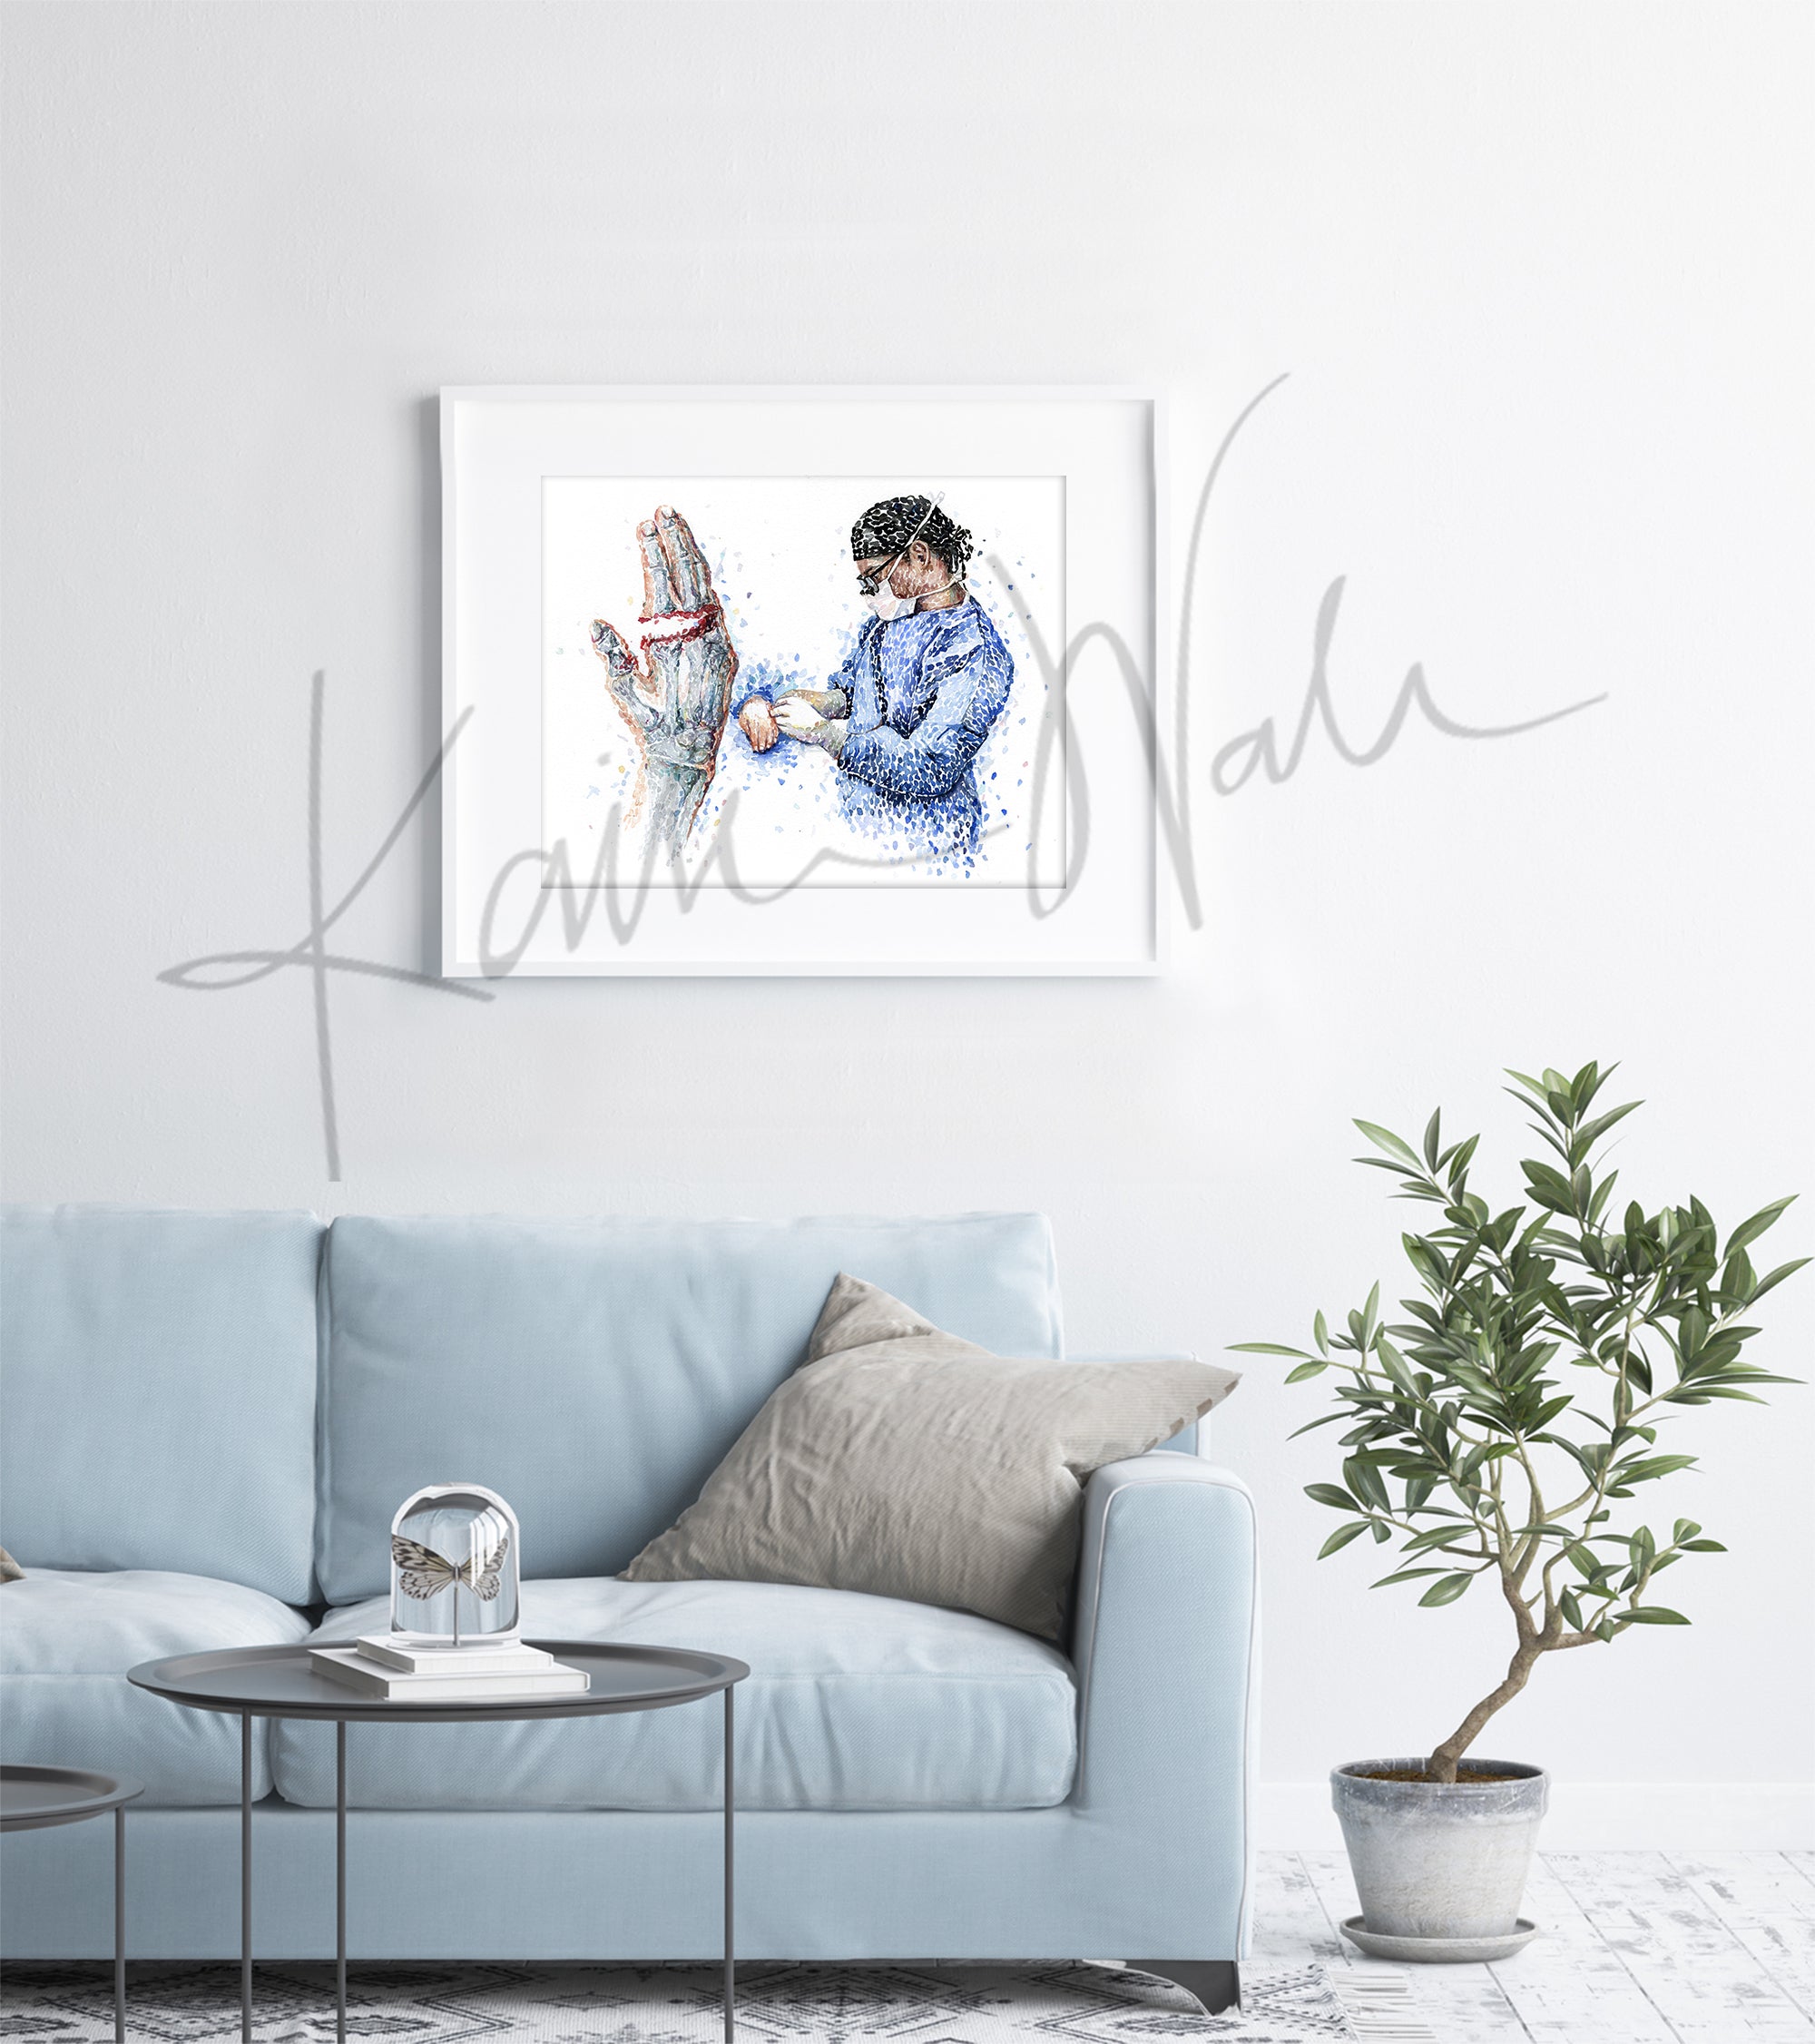 Framed watercolor painting of a finger amputation surgery. The painting is hanging over a blue couch.